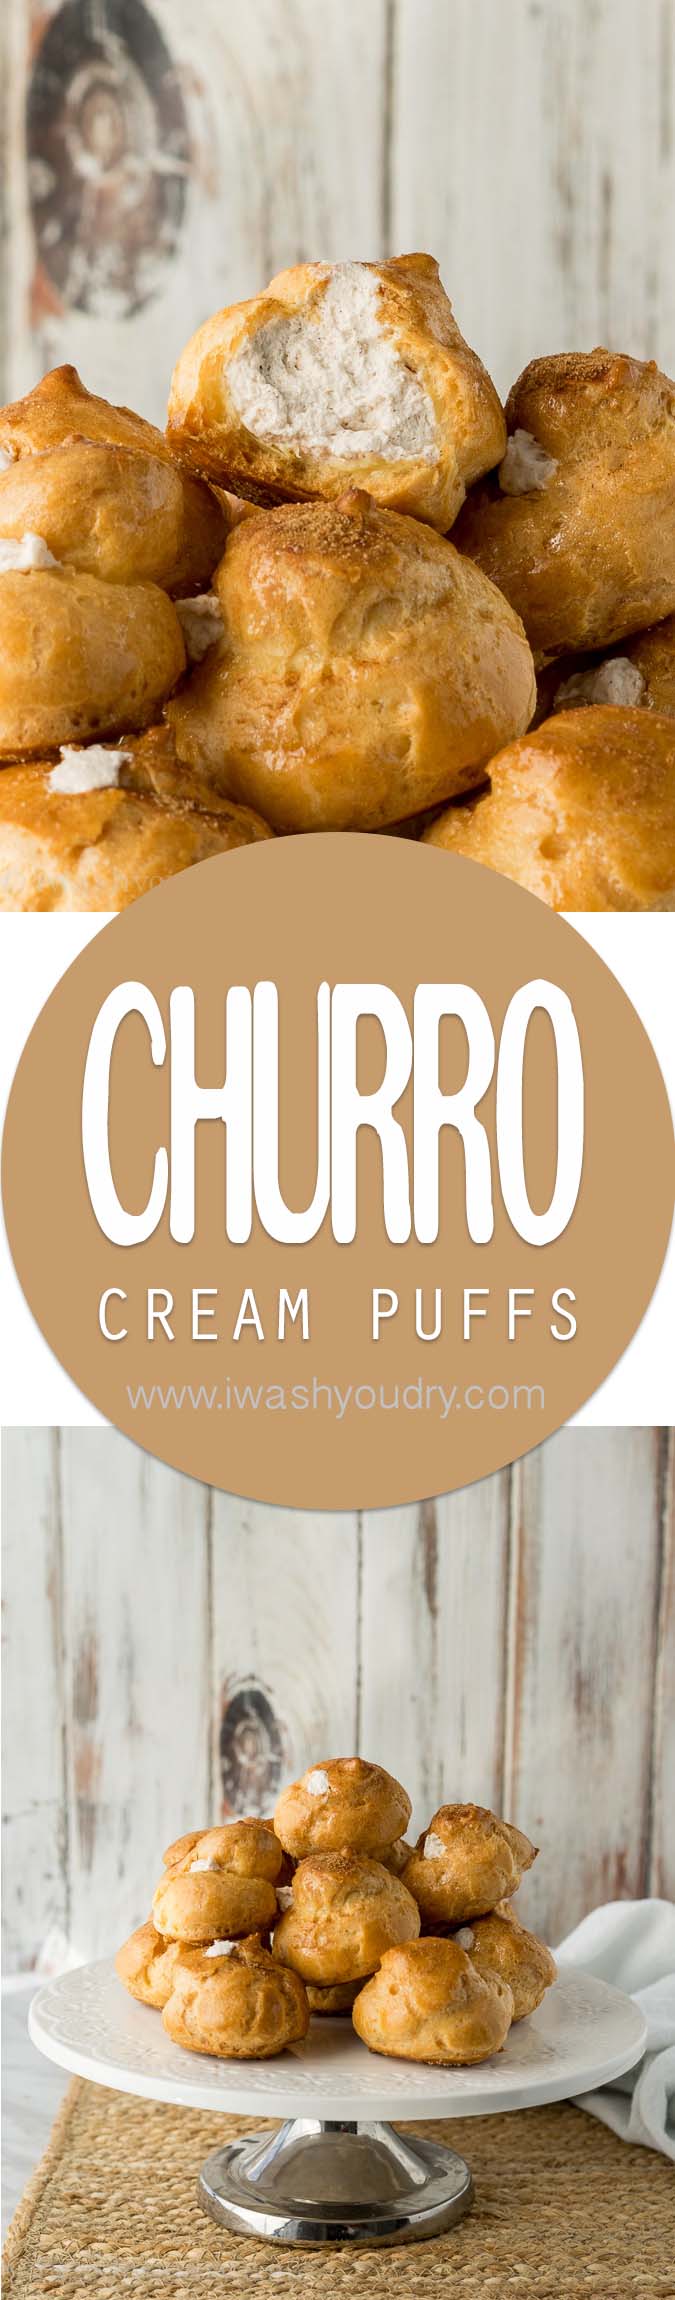 I never knew making homemade cream puffs was so easy! These Churro Cream Puffs are brushed with honey and dusted with cinnamon and sugar. The filling is a delightful cinnamon flavored whipped cream! 